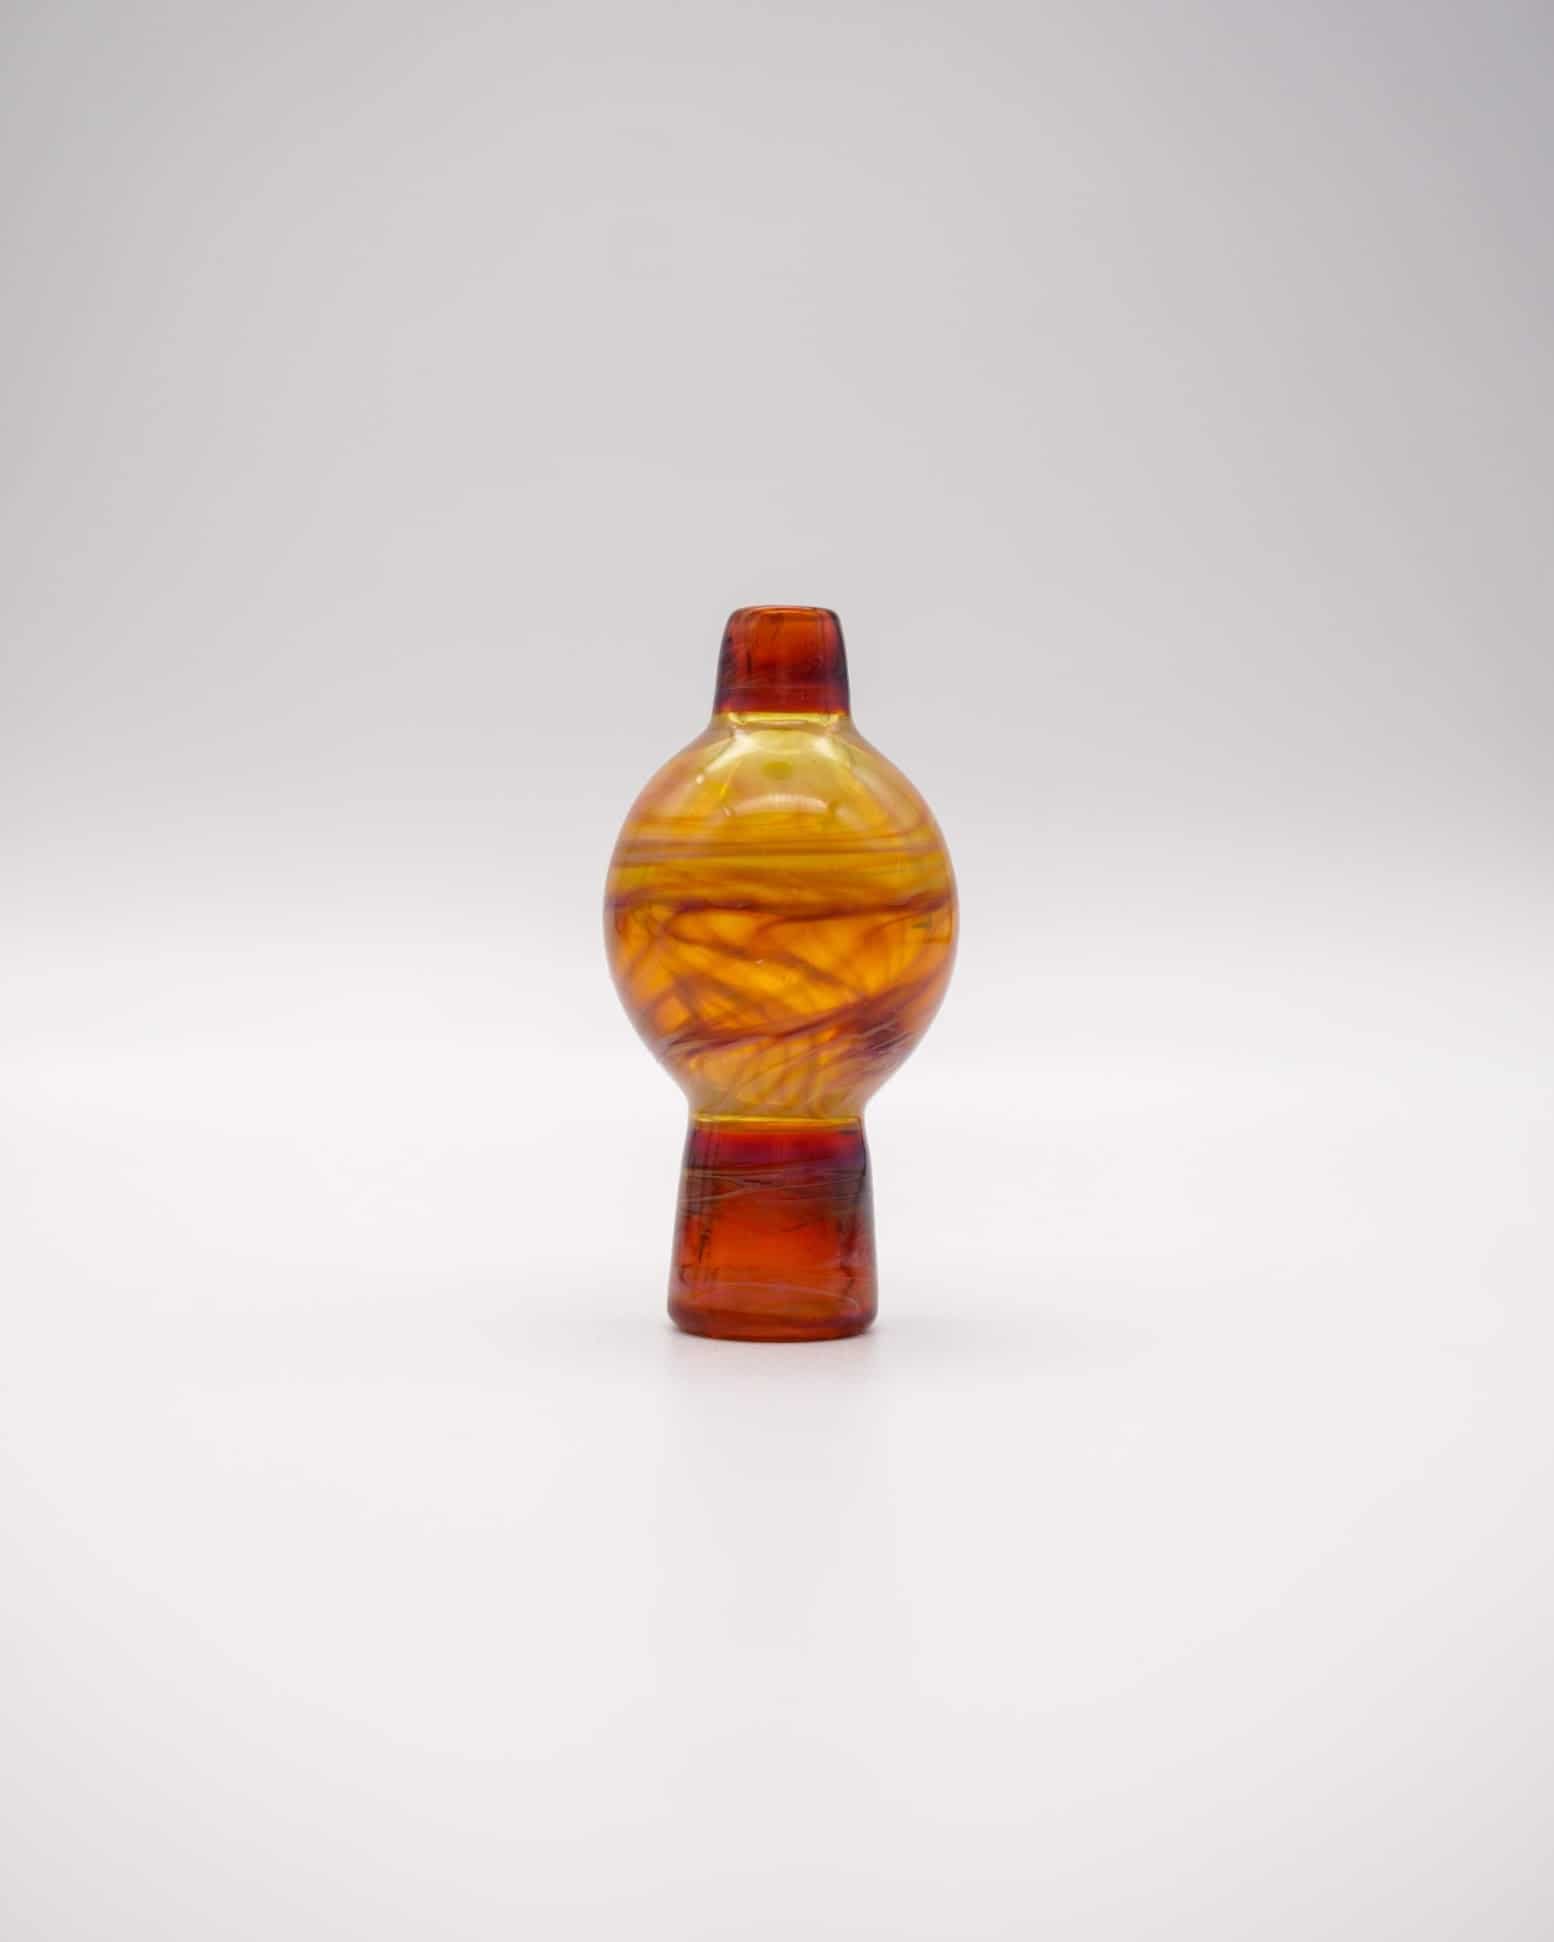 exclusive design of the Amber Carb Cap by Gomez Glass